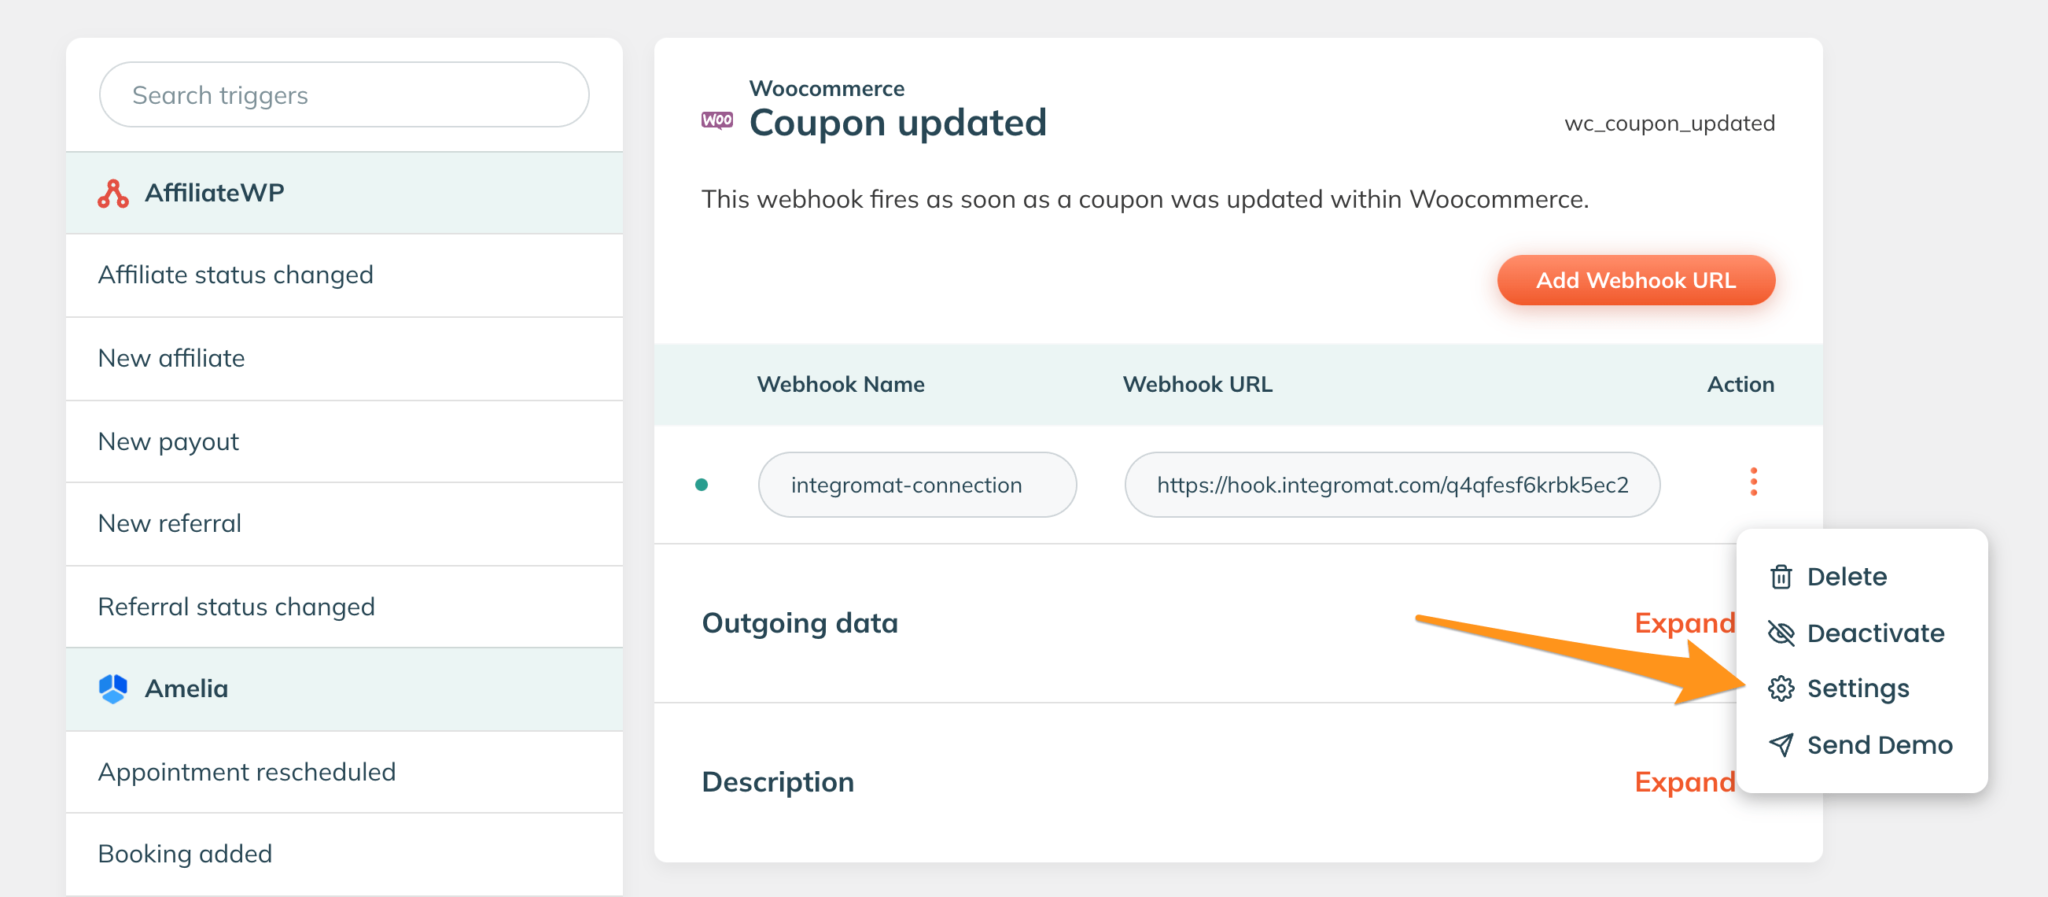 The WP Webhooks screen of the Contact removed from list trigger